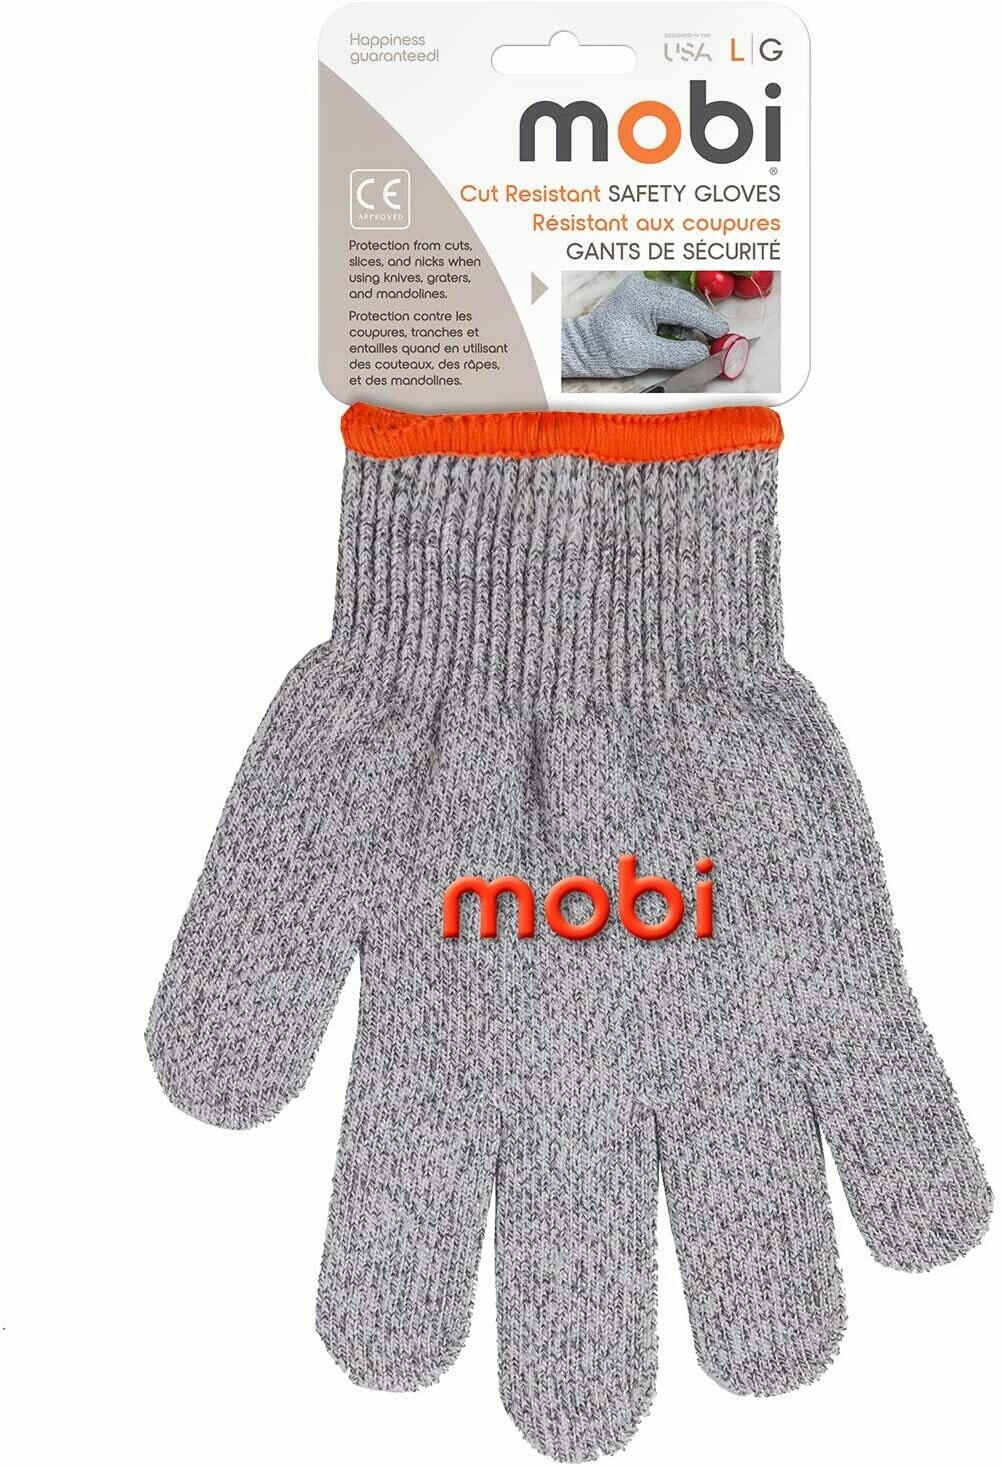 Mobi® Cut Resistant Safety Glove